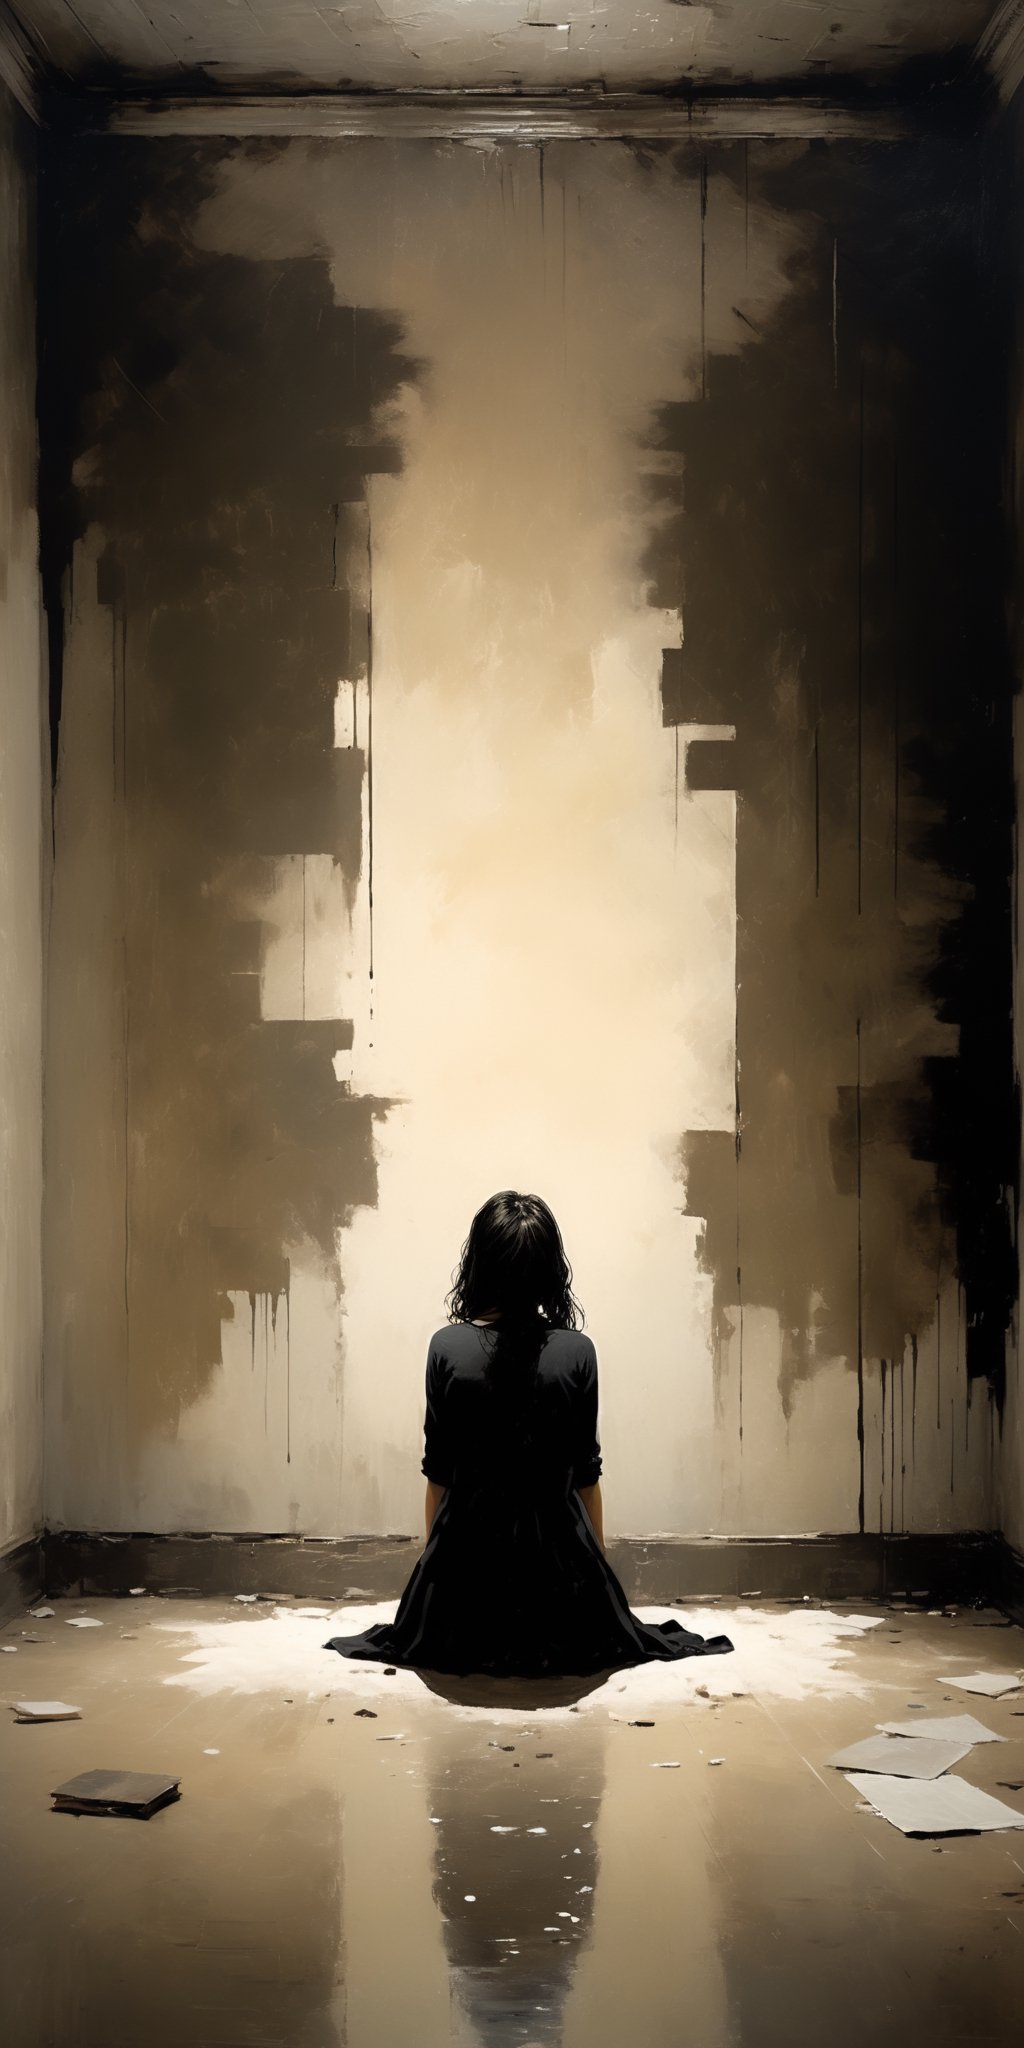 (masterpiece, high quality, 8K, high_res), 
extremely detailed illustration, abstract picture, symbolism, sensual, dark, dramatic, sad, psyholigic,
an empty room with black walls, text written on the walls in white paint, a girl sits in the center of the room, her pose expresses despair and depression,
The room itself symbolizes the place in her mind where she hid all her regrets, fears, doubts, which are expressed in the form of text on the walls, and her being in this room signifies her attempts to cope with mental problems. The desperation pose suggests that she can't handle it. The film raises the theme of loneliness and the inability to cope with depression personally, that everyone needs help and courage to share their problems with others.